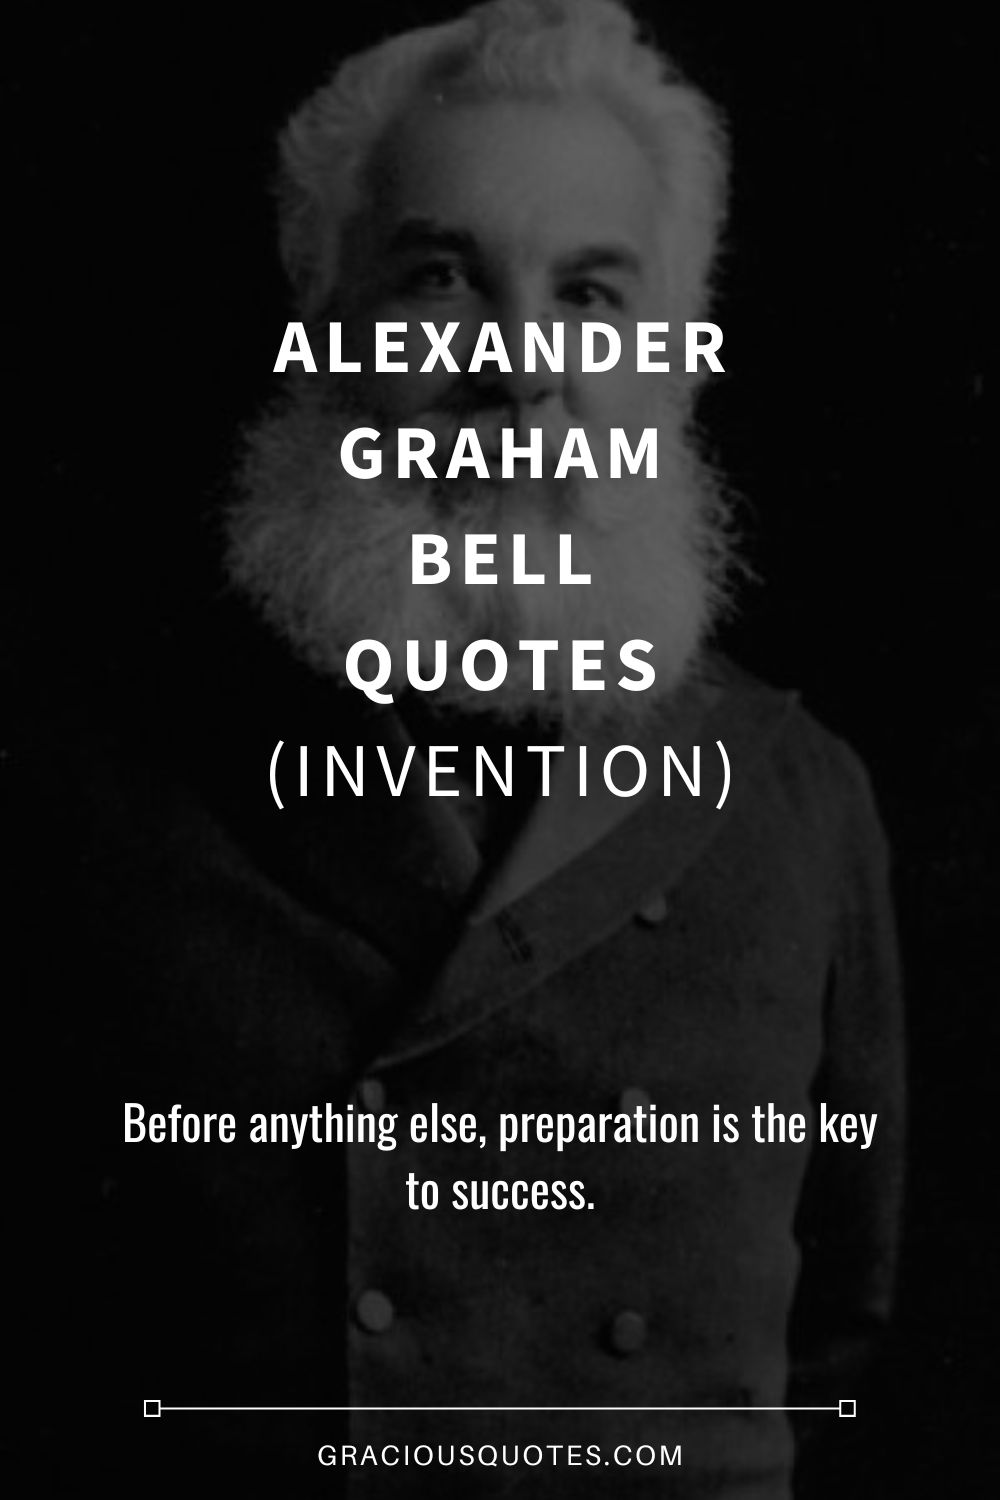 Alexander Graham Bell Quotes (INVENTION) - Gracious Quotes